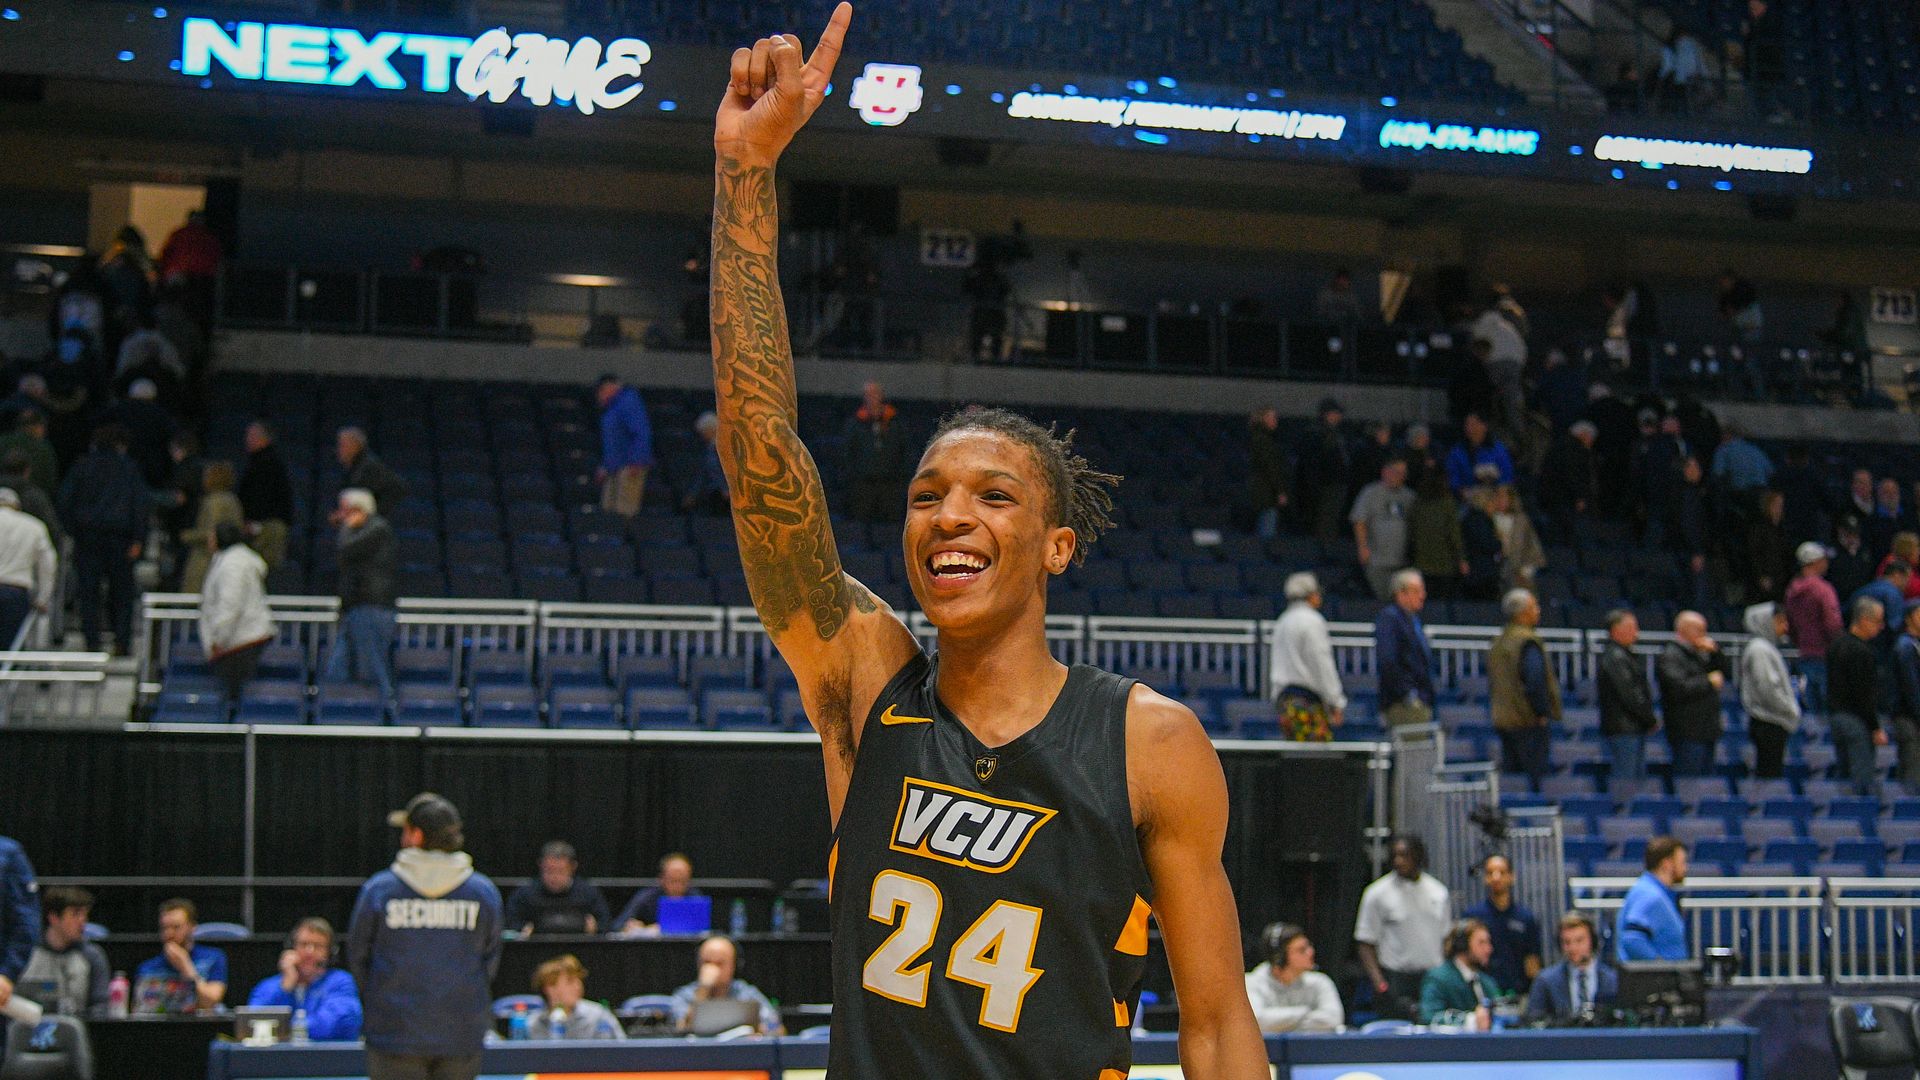 VCU Rams guard Nick Kern Jr. (24) celebrates on the court following a college basketball game between the VCU Rams and the Rhode Island Rams on February 15, 202